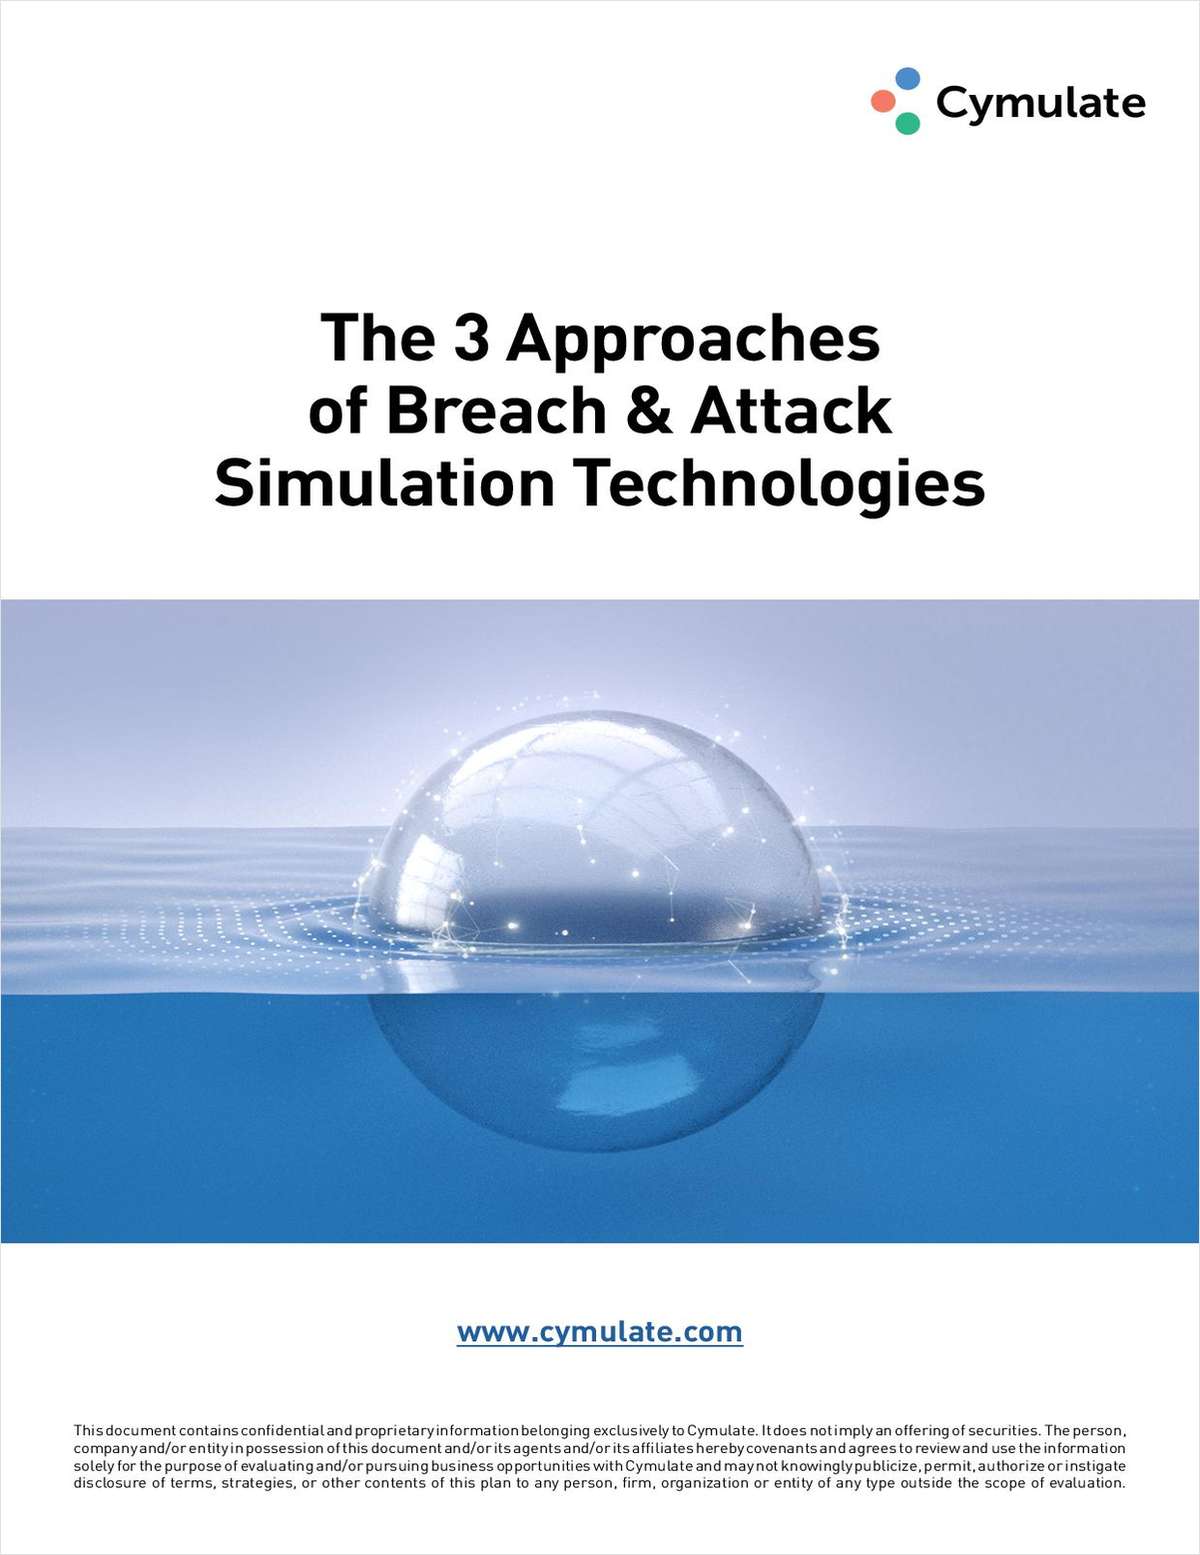 3 Approaches to Breach and Attack Simulation